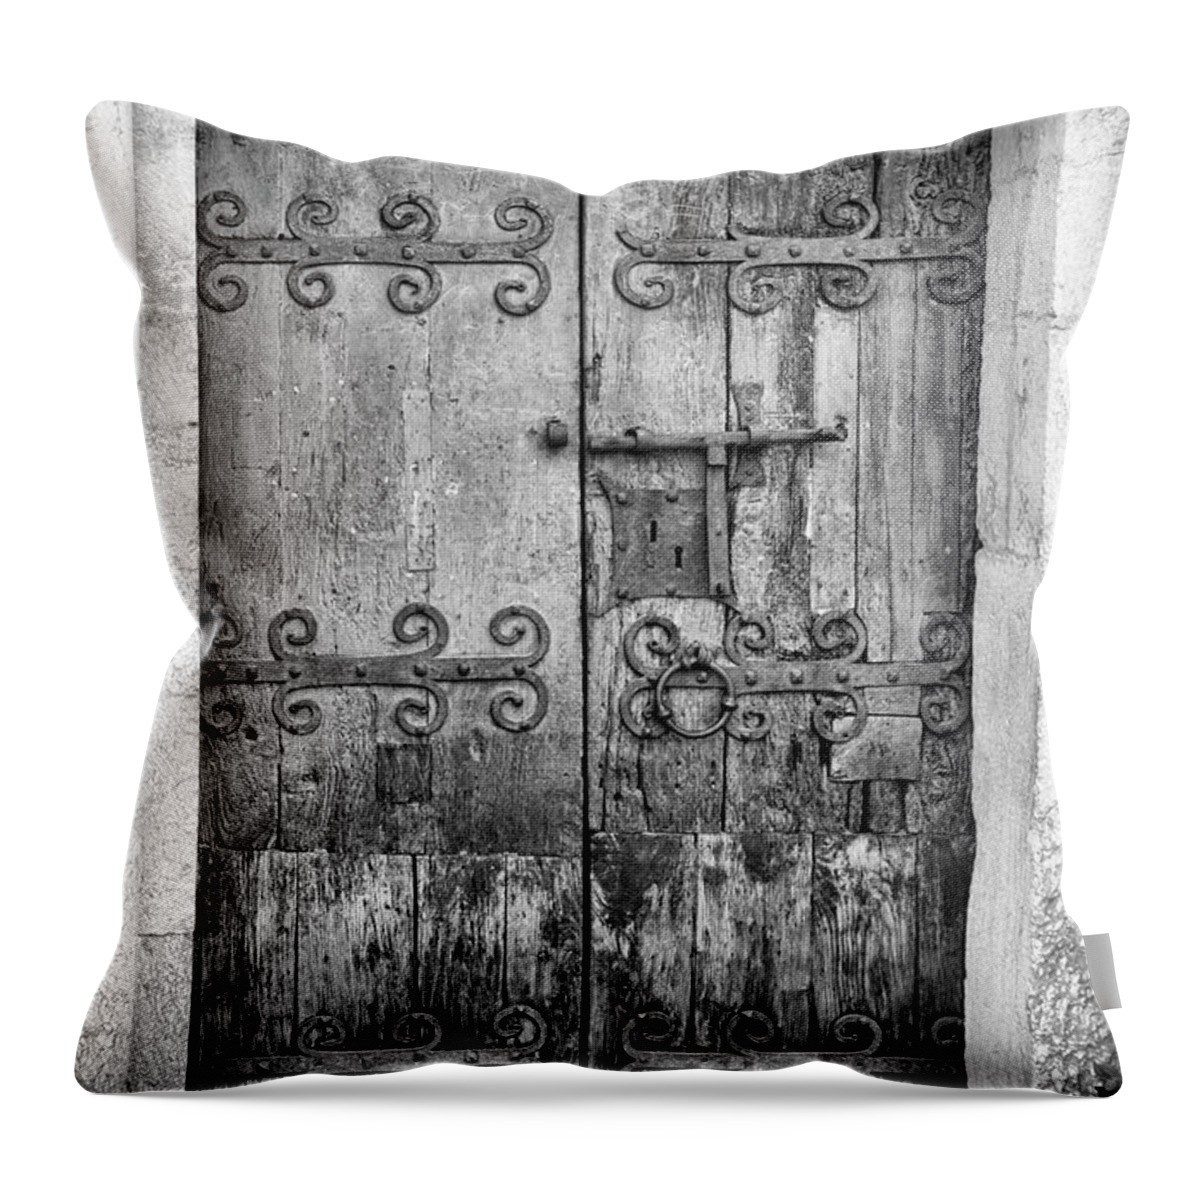 France Throw Pillow featuring the photograph Villefranche de Conflent Old Door Black White France by Chuck Kuhn